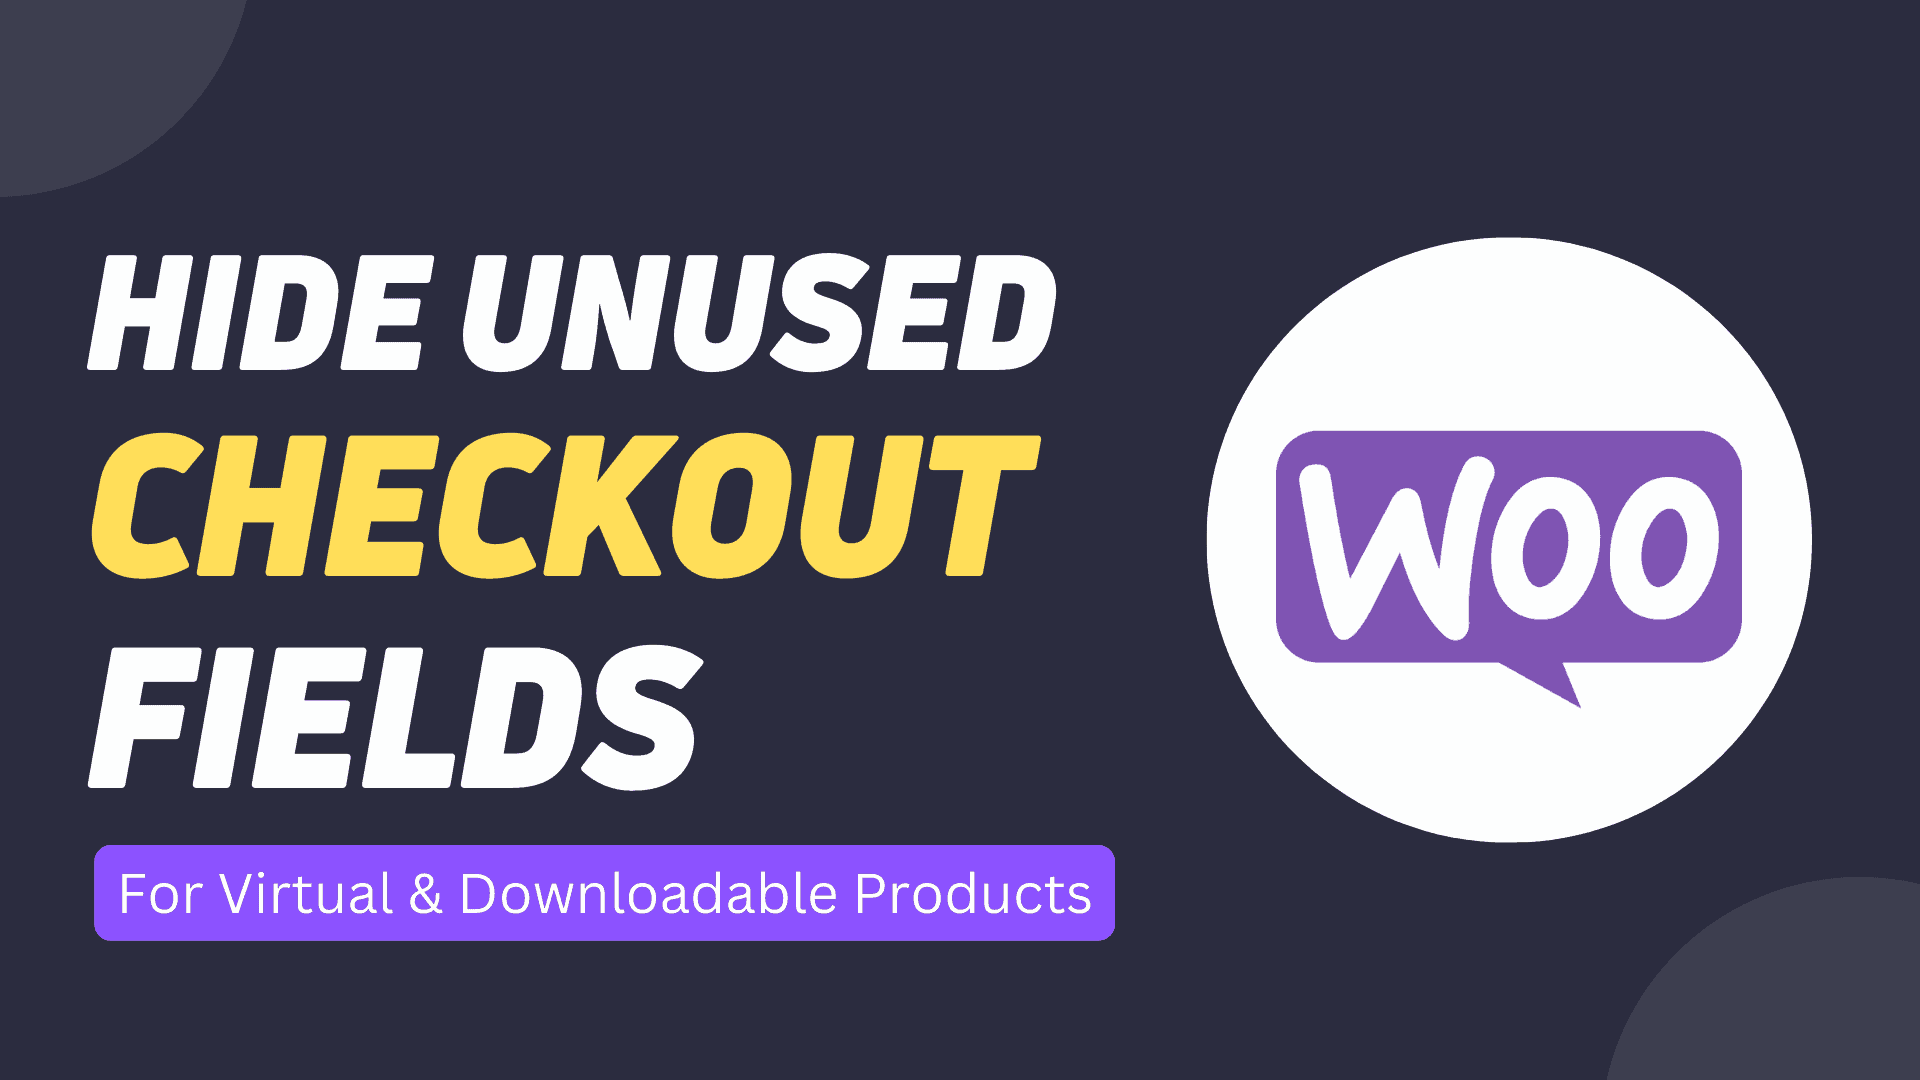 How to Hide unused Checkout fields in WooCommerce